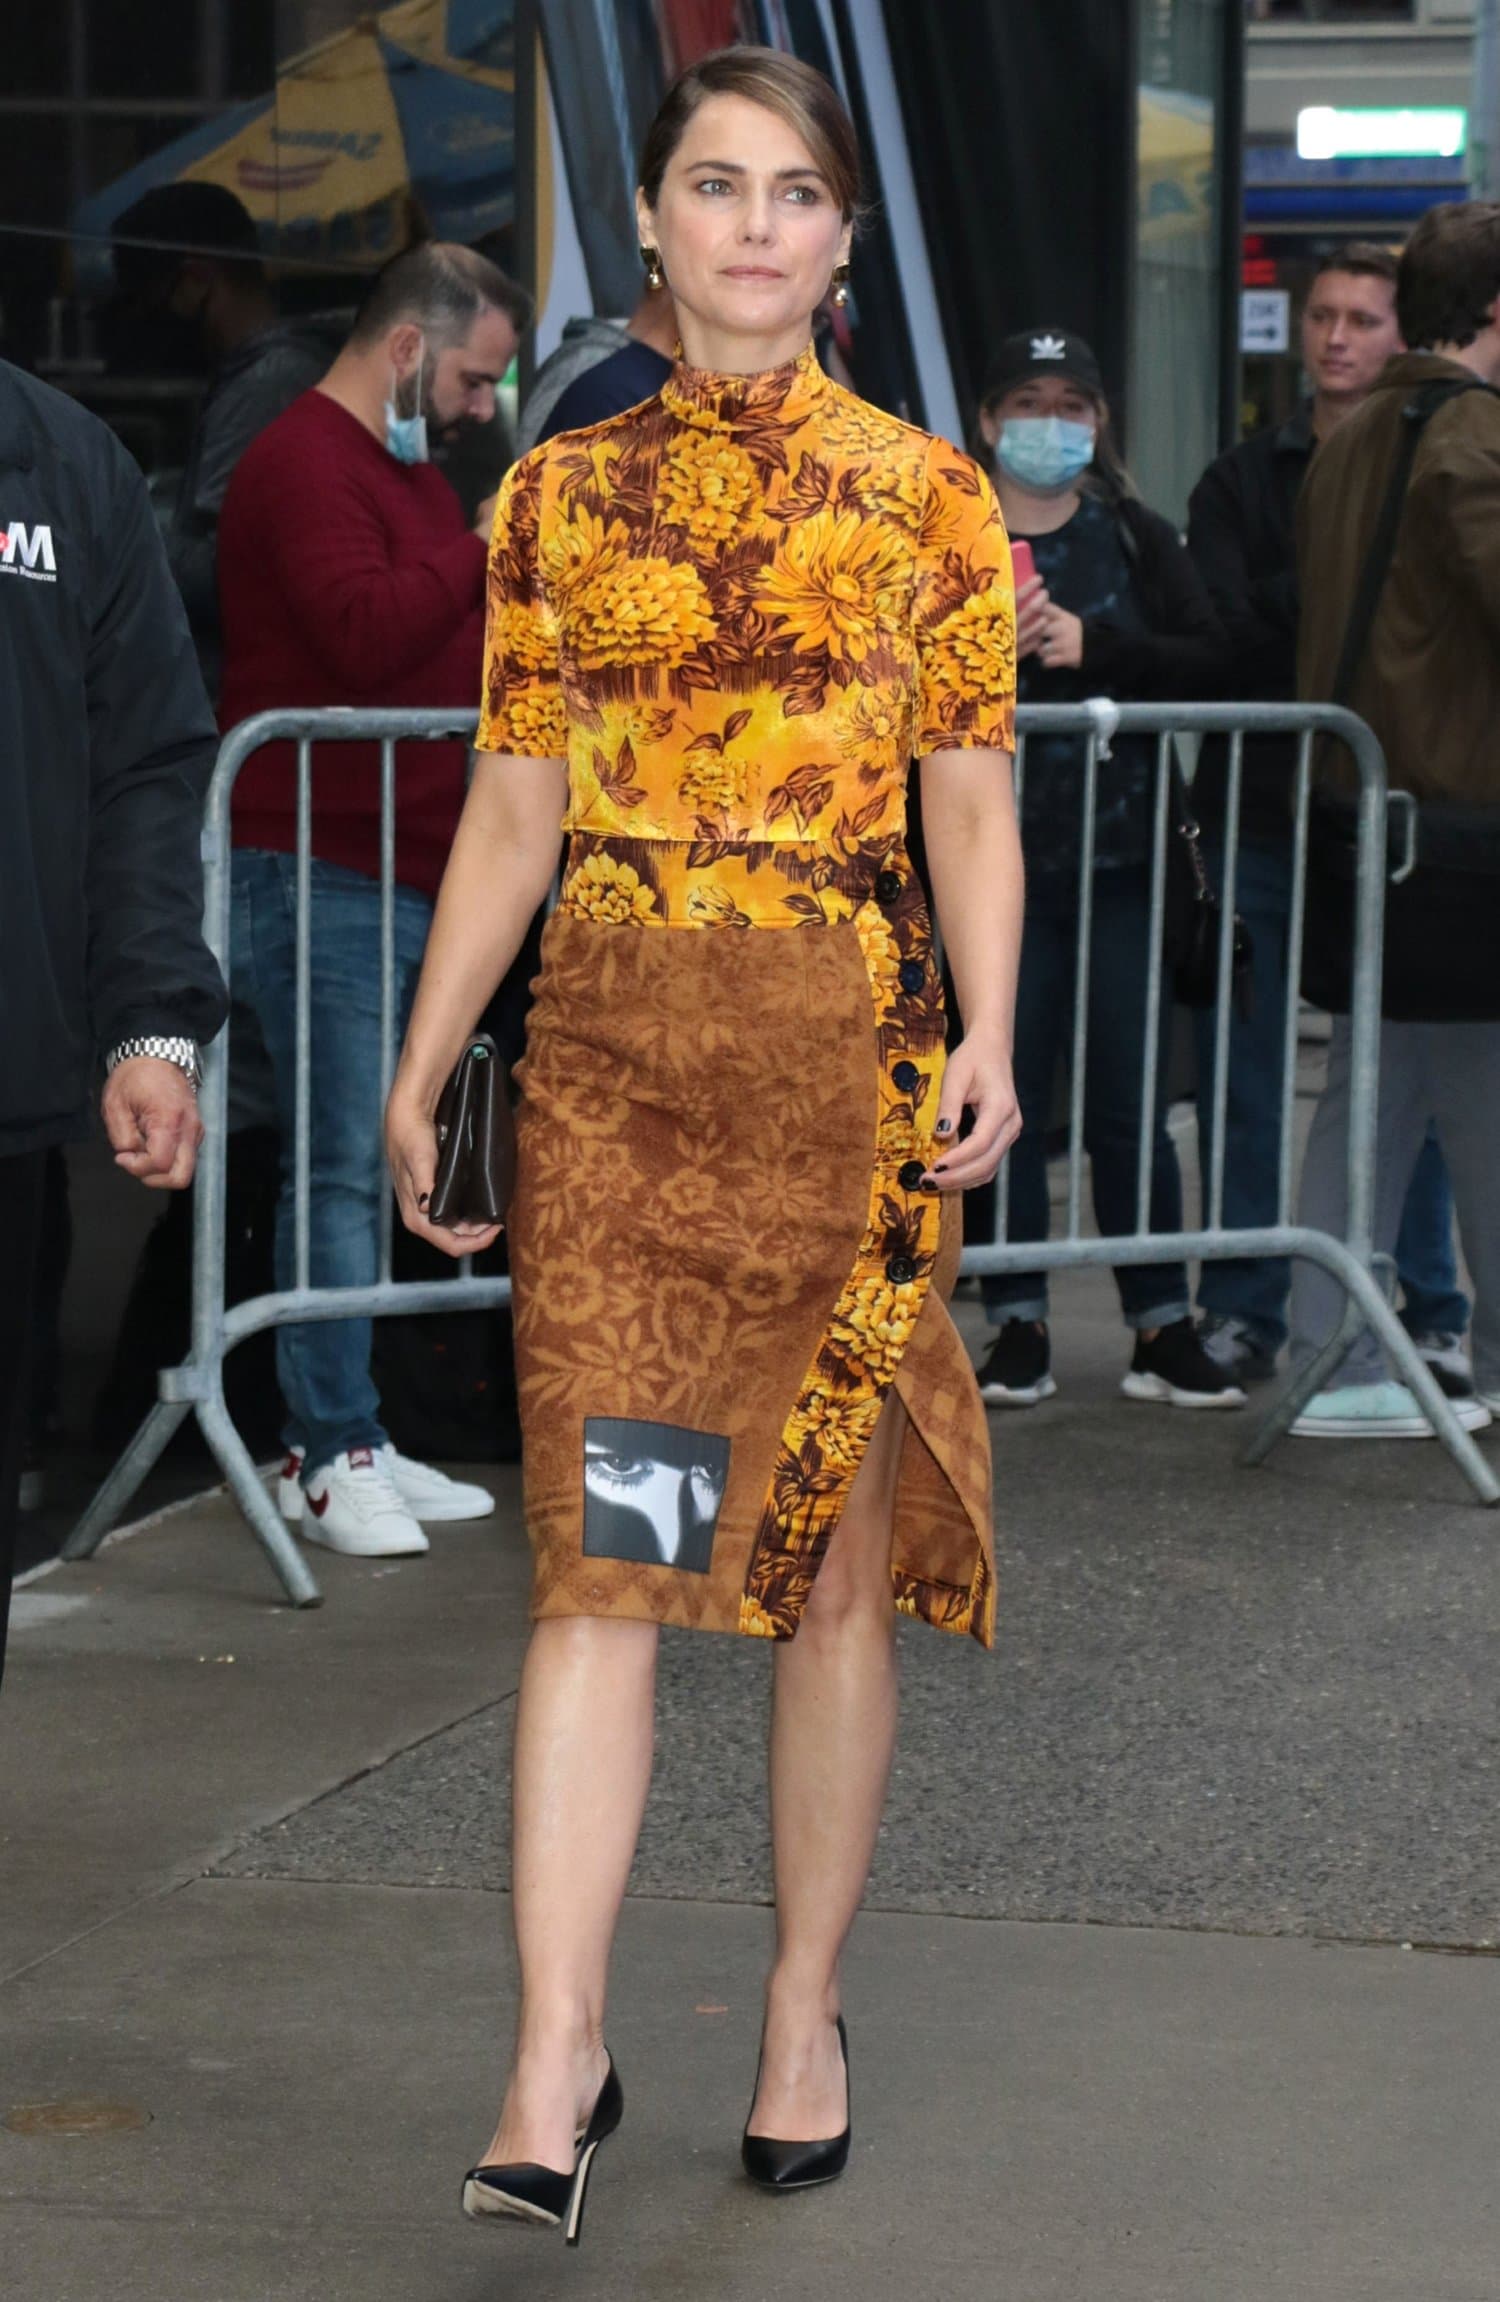 Keri Russell steps out in a golden Kwaidan Editions floral dress and a black pumps for an appearance on Good Morning America